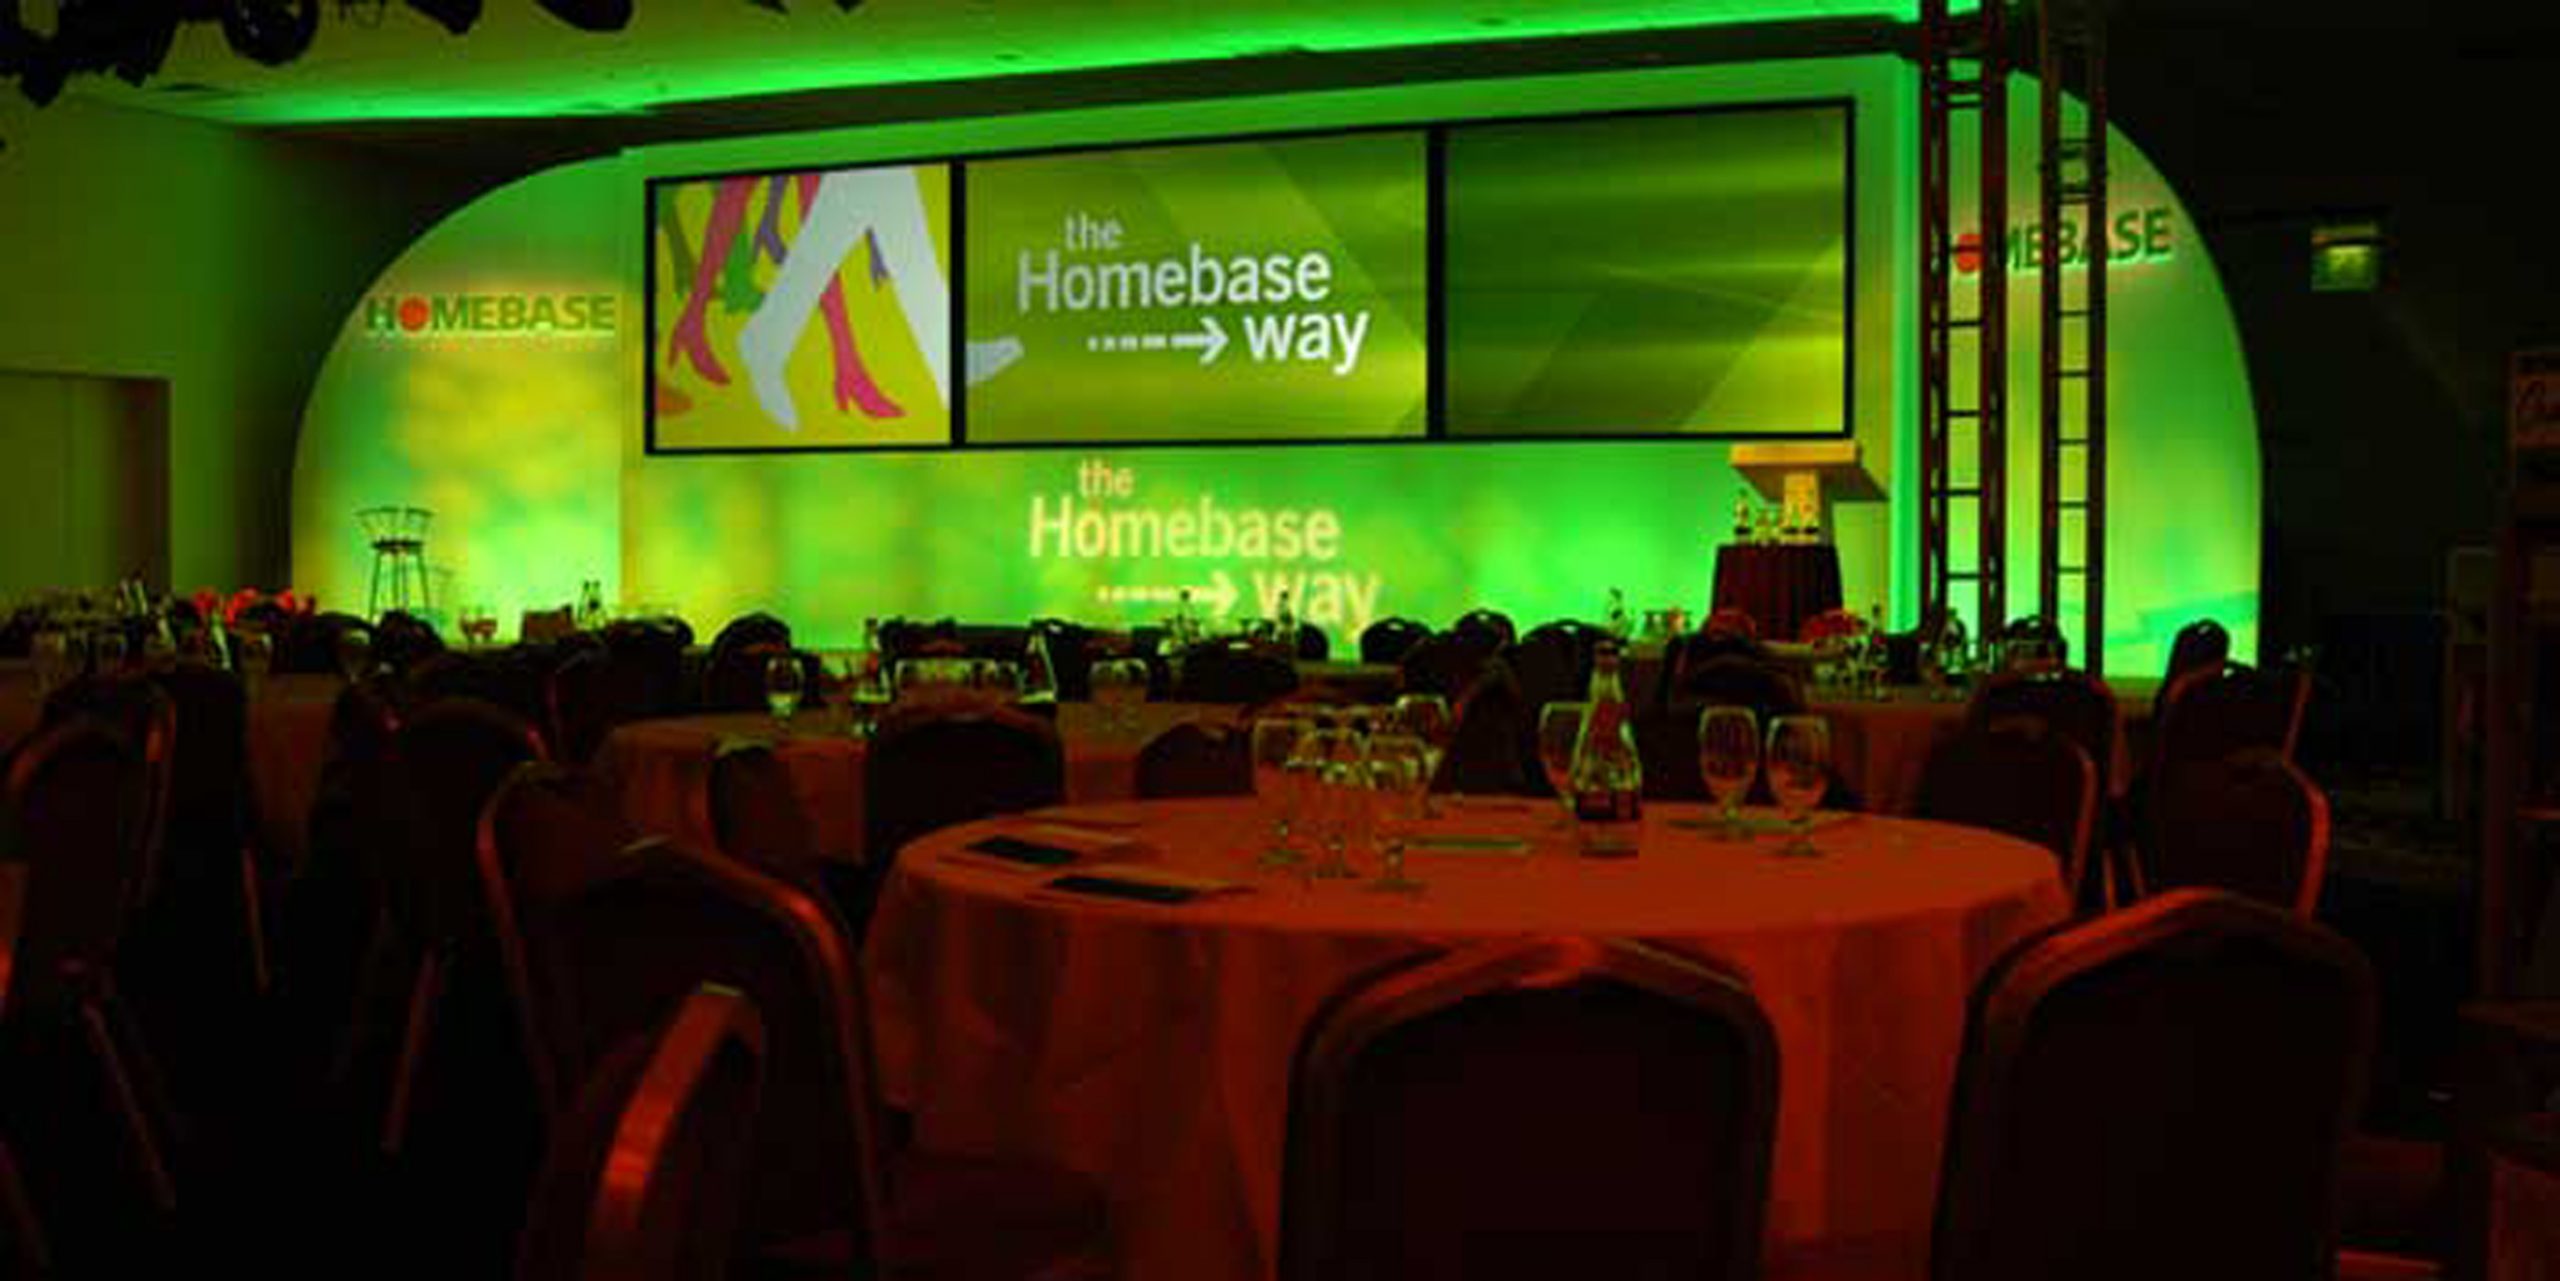 Homebase conference set - another extraordinary conference from www.extraordinaryevents.co.uk